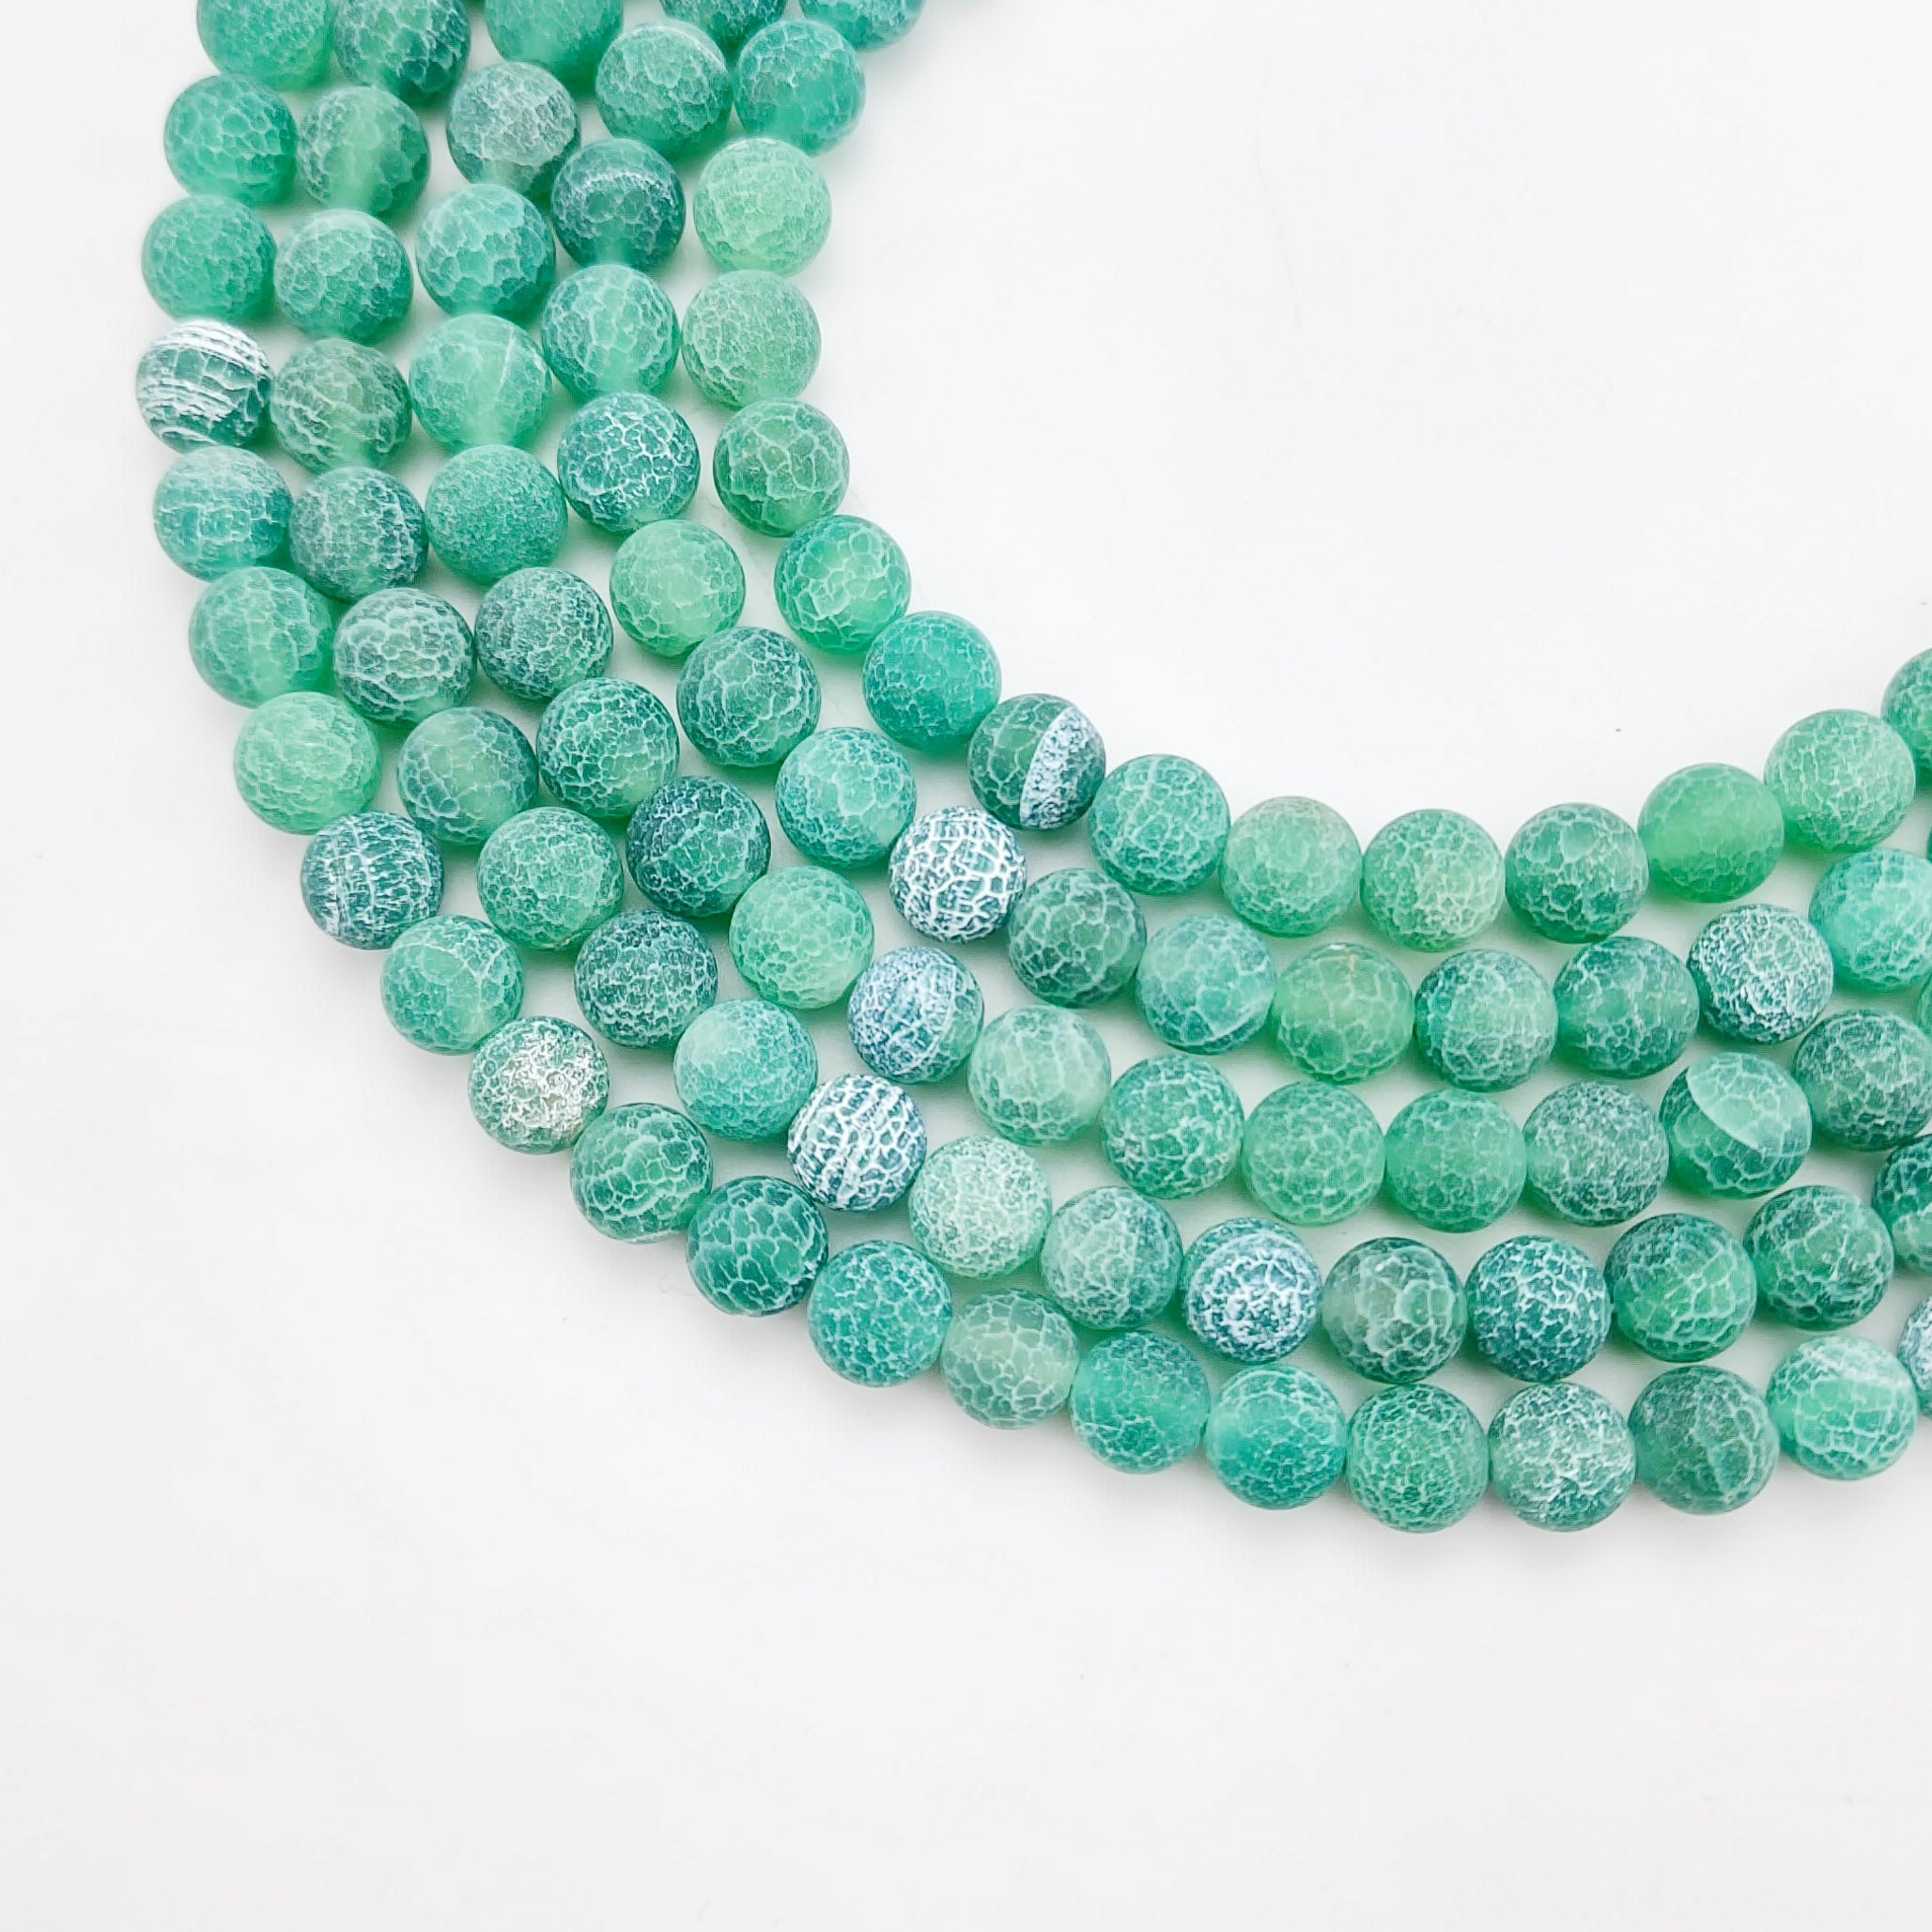 8mm Frosted Green Crackle Agate Bead Strand